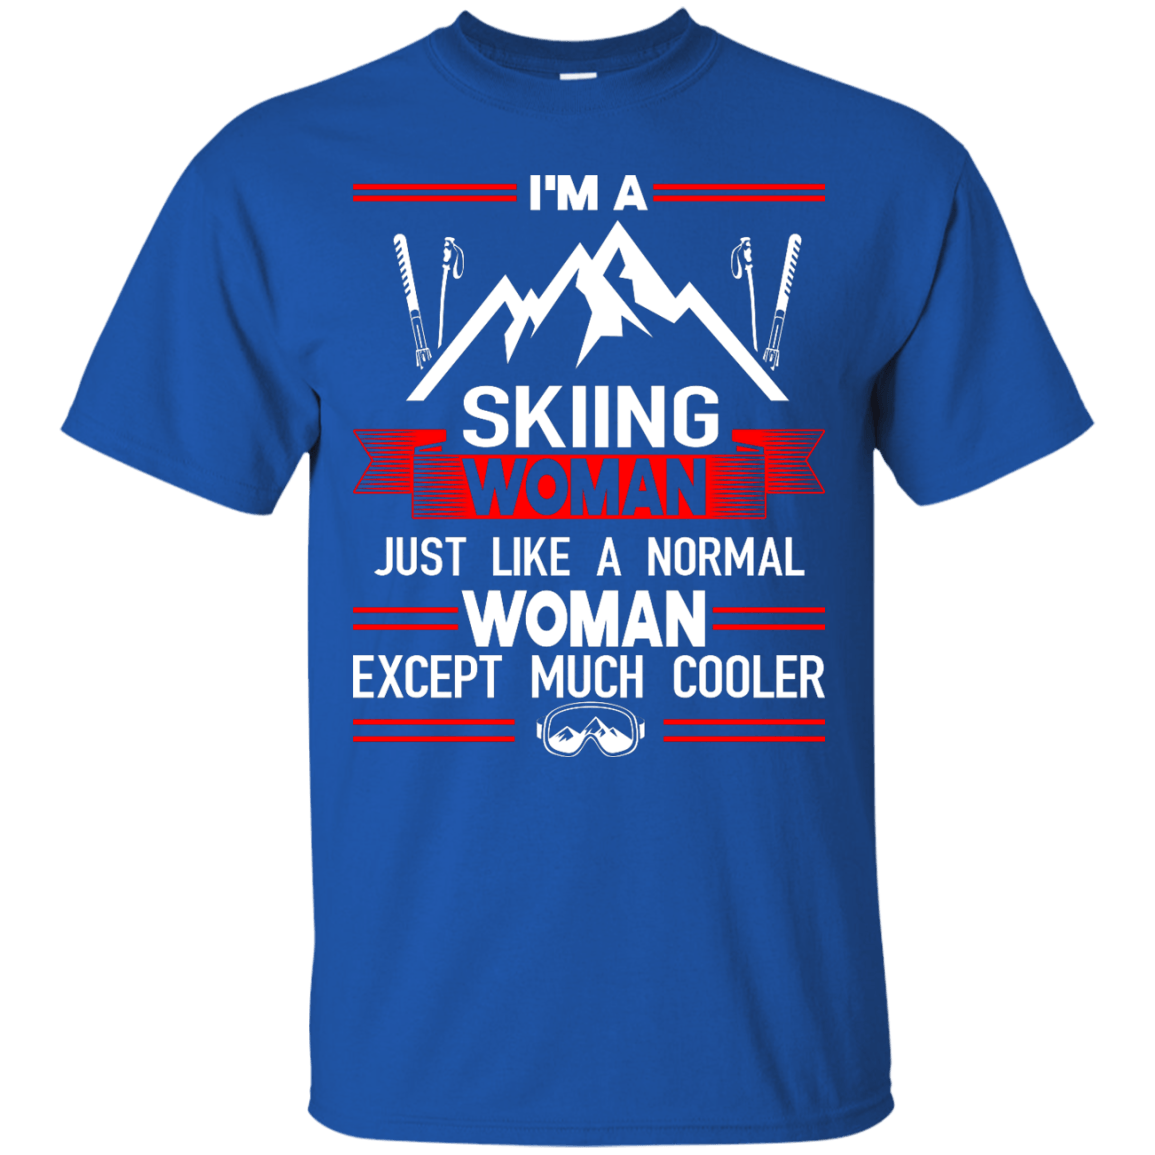 I'm A Skiing Woman Except Much Cooler Tees - Powderaddicts